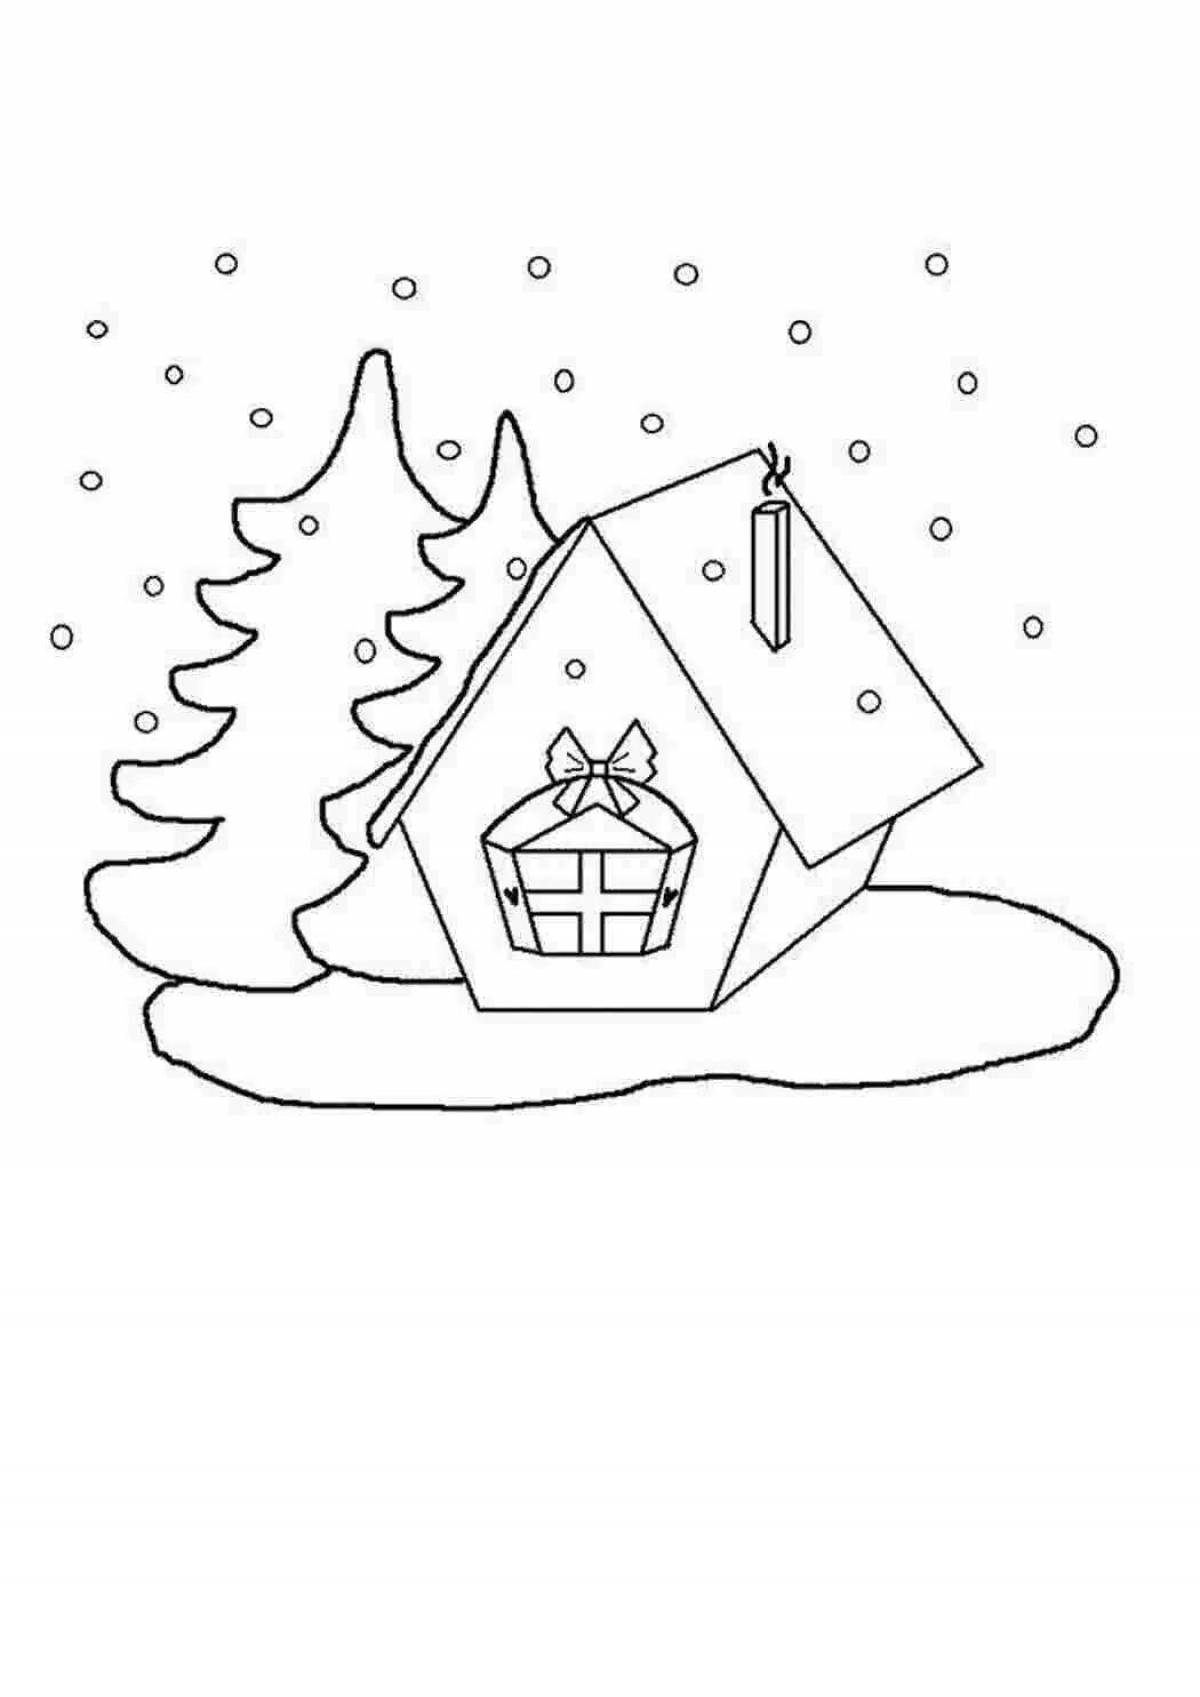 Coloring book winter house for children to play